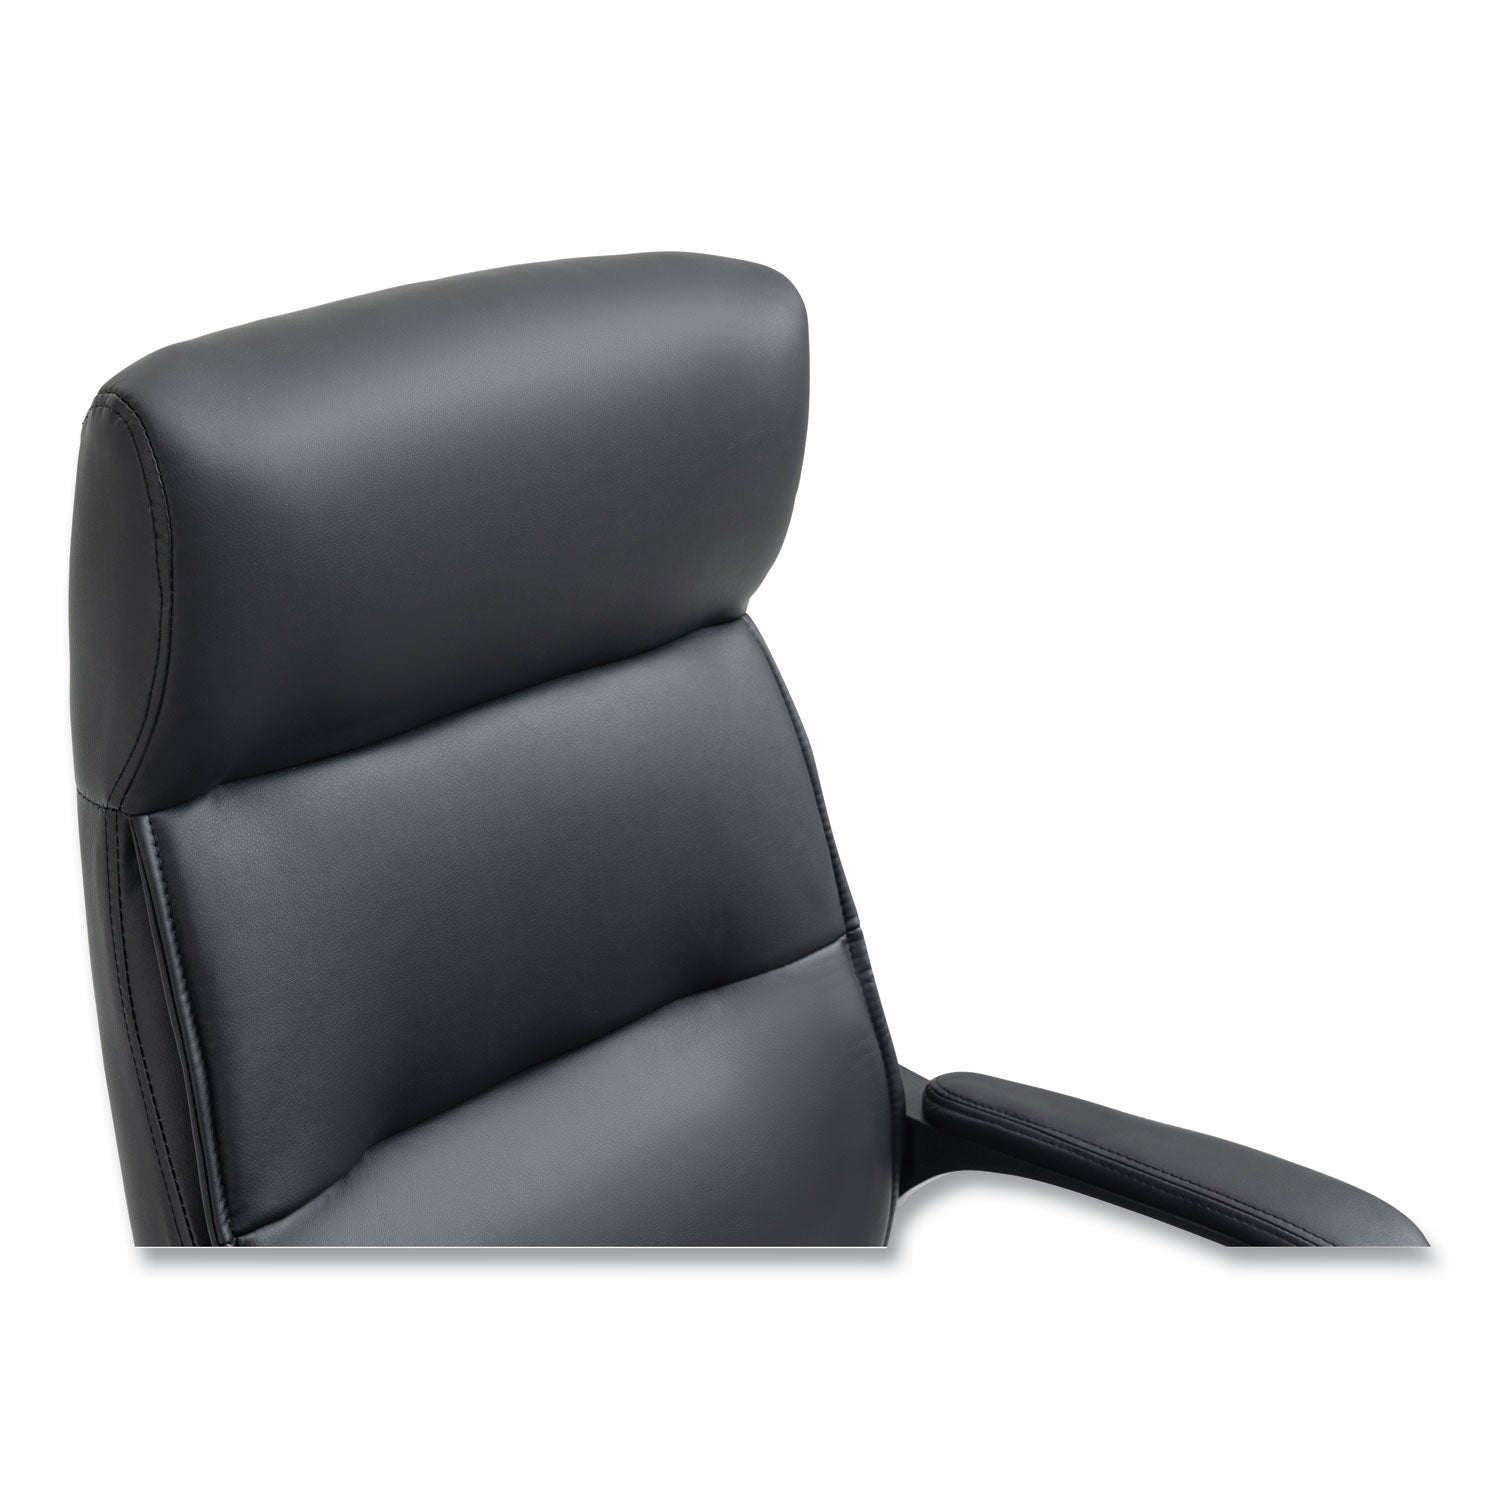 alera-oxnam-series-high-back-task-chair-supports-up-to-275-lbs-1756-to-2138-seat-height-black-seat-back-black-base_aleon41b19 - 4